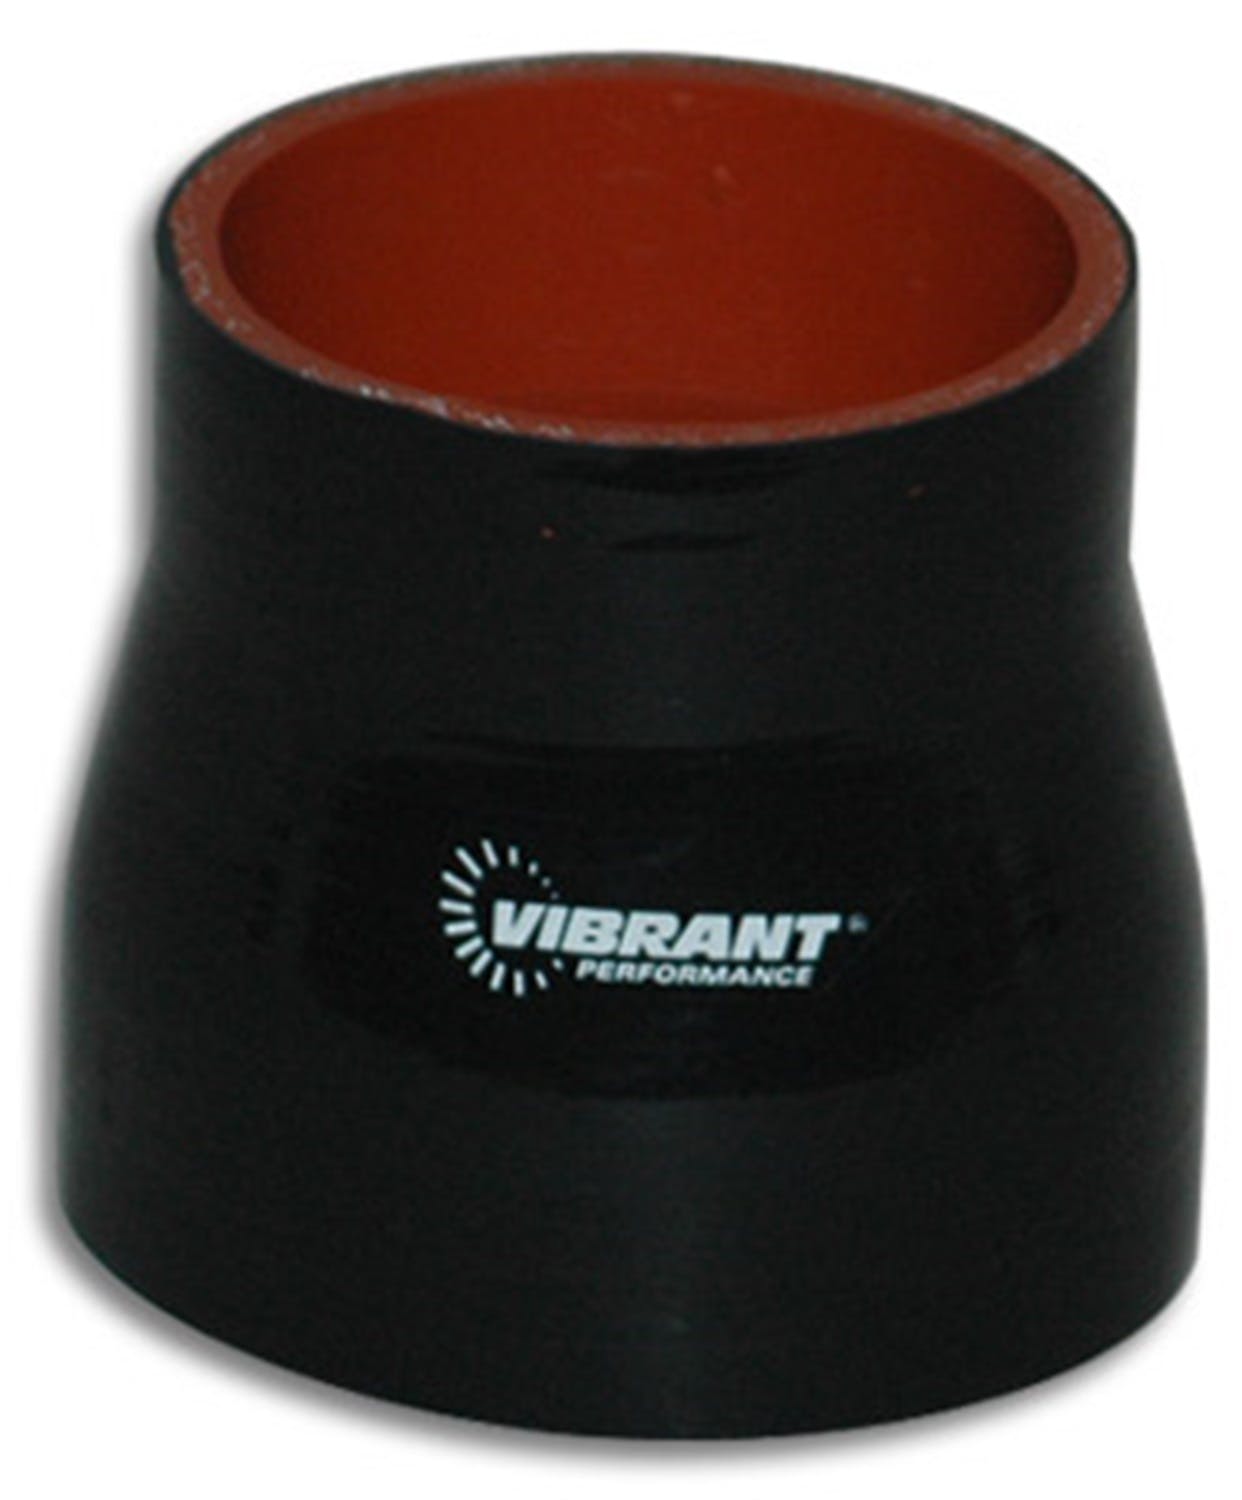 Vibrant Performance 2762 4 Ply Reducer Coupling, 1.5 inch x 1.75 inch x 3 inch Long - Black